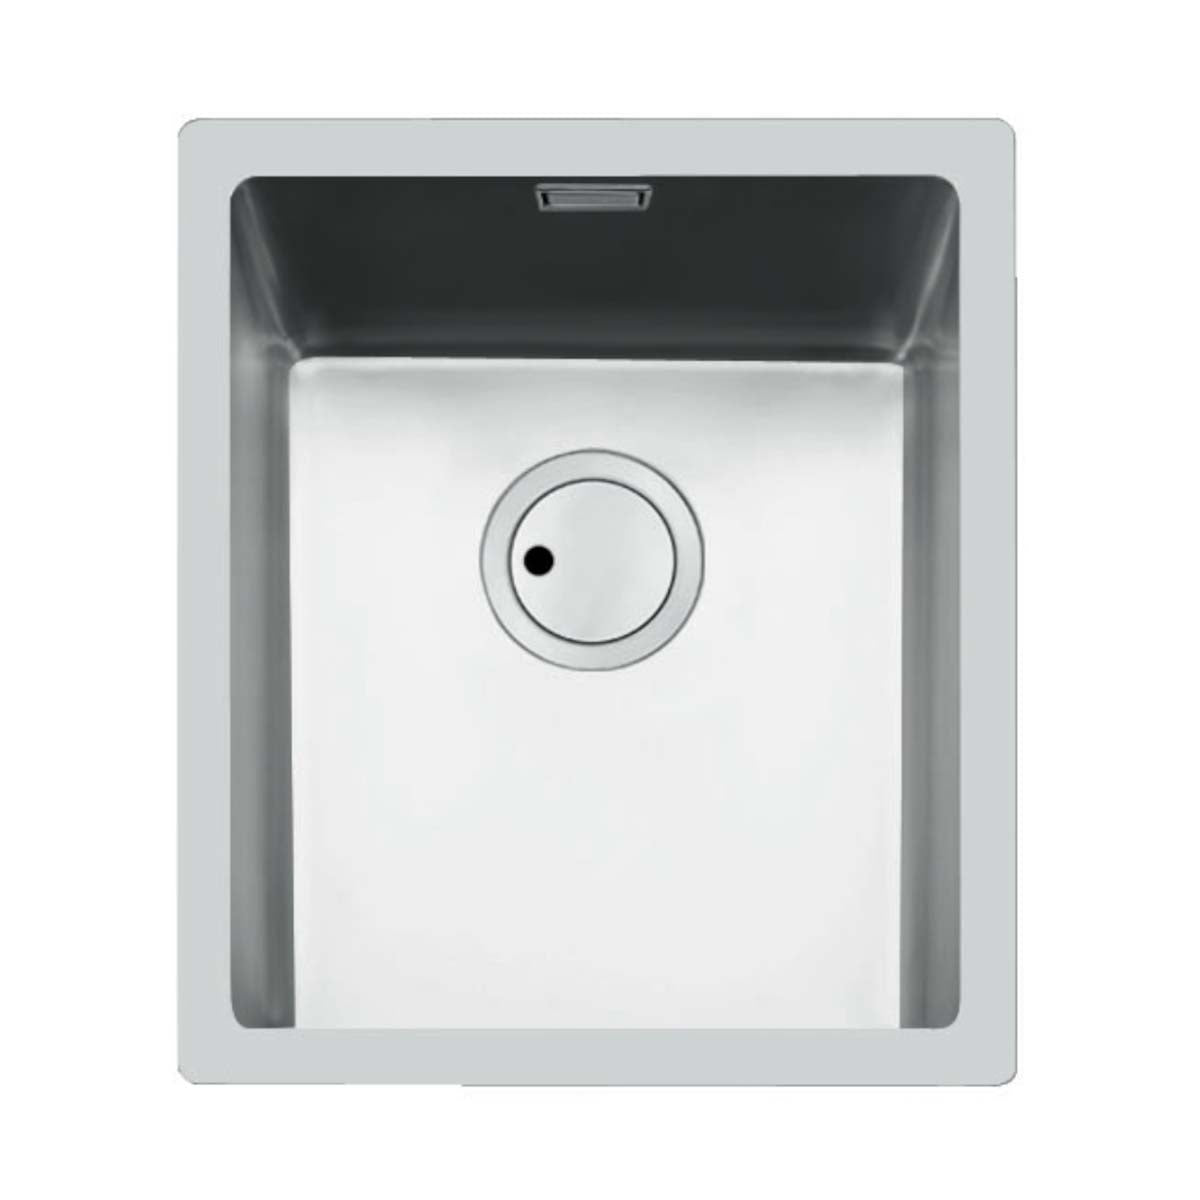 Foster S4001 Kitchen Sink Brushed Stainless Steel 340x400mm